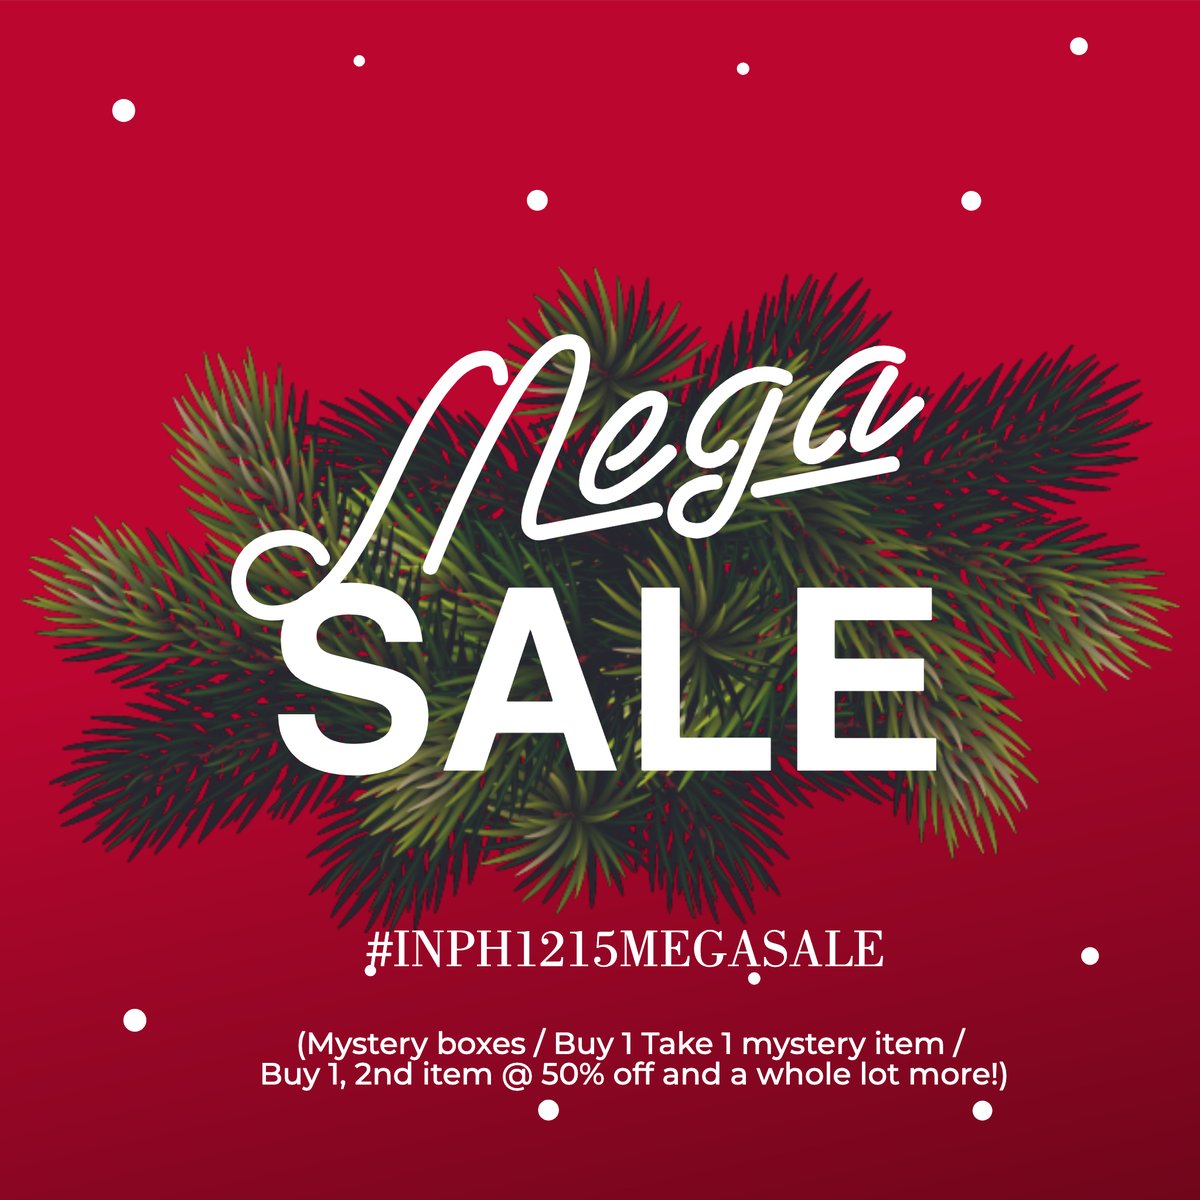 🛒#INPH1215MEGASALE 

WEBSHOP IS NOW LIVE! 

Kindly disregard the descriptions; here are the important dates to remember:
DOP: DEC 17, 5PM
Shipping date: DEC 27

VOUCHERS:
INPH3RDXMAS
HEYHEYHEY
GIFTGIVINGSEASON

SHOP HERE: interludephgos.company.site/ANIME-c1128573…